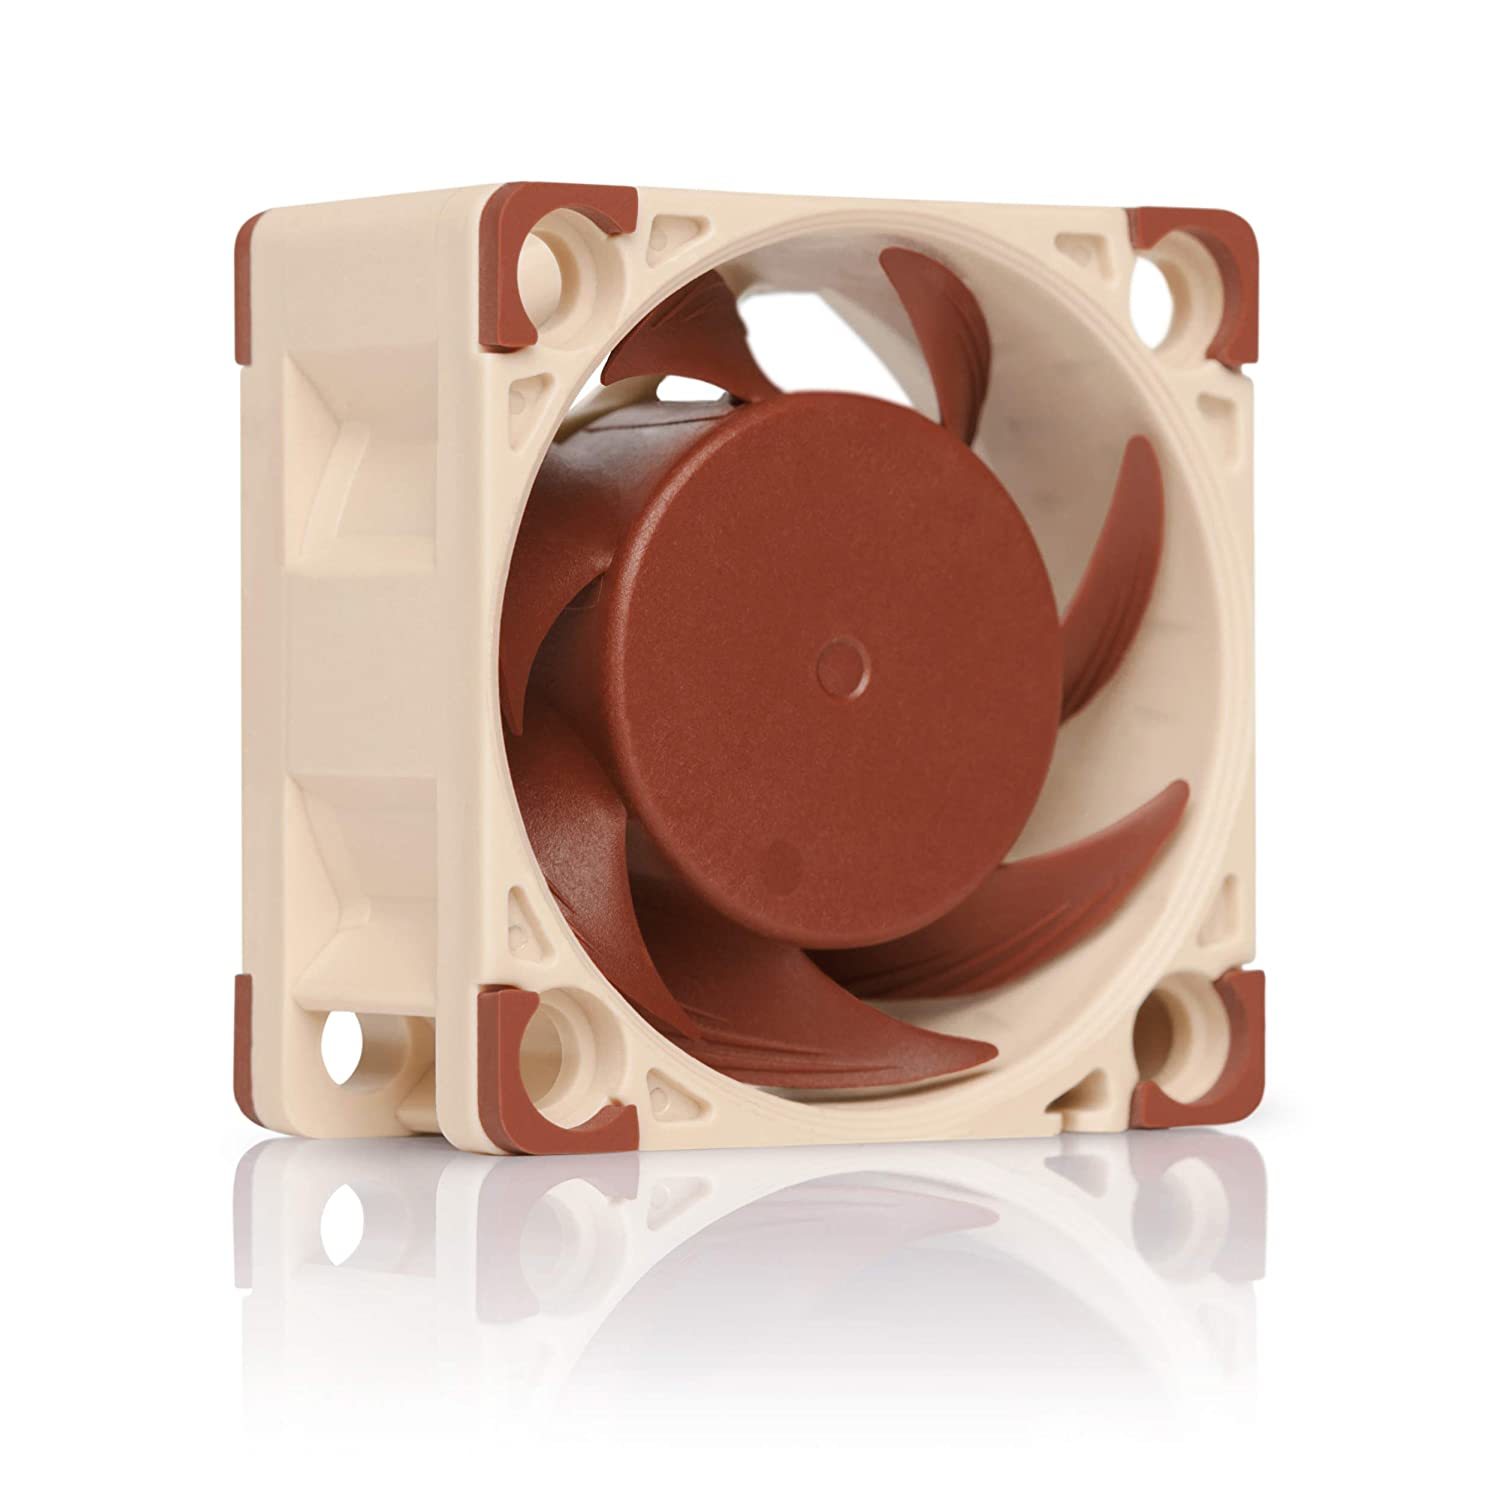 Primary image for Noctua NF-A4x20 PWM, Premium Quiet Fan, 4-Pin (40x20mm, Brown)